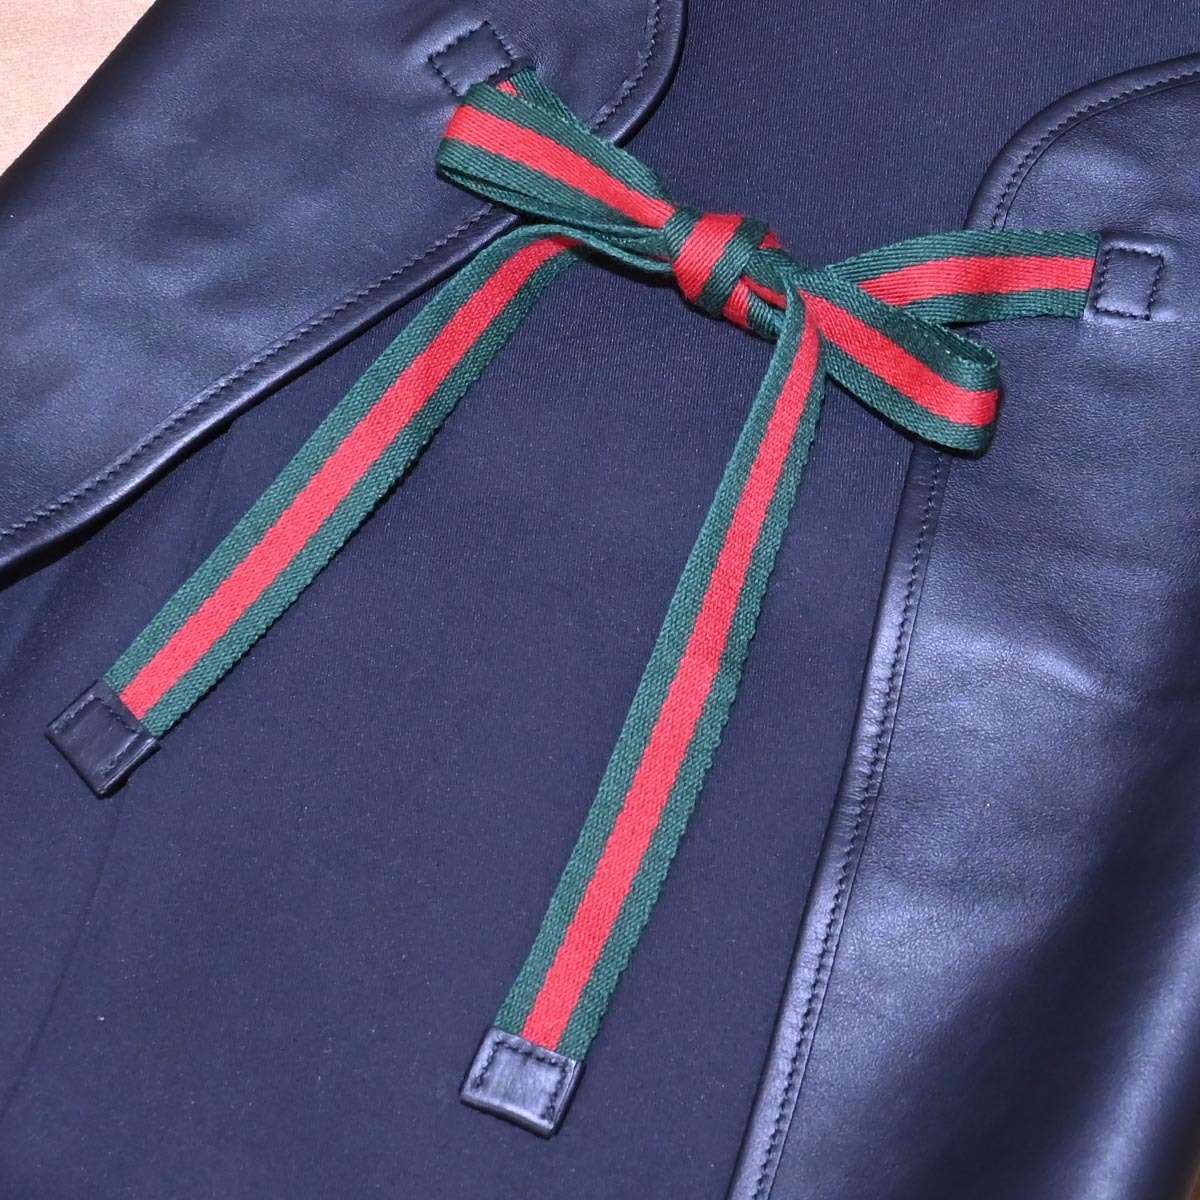  genuine article new goods Gucci ultimate rare Meister exclusive use web line all leather apron black leather small articles leather craft GUCCI